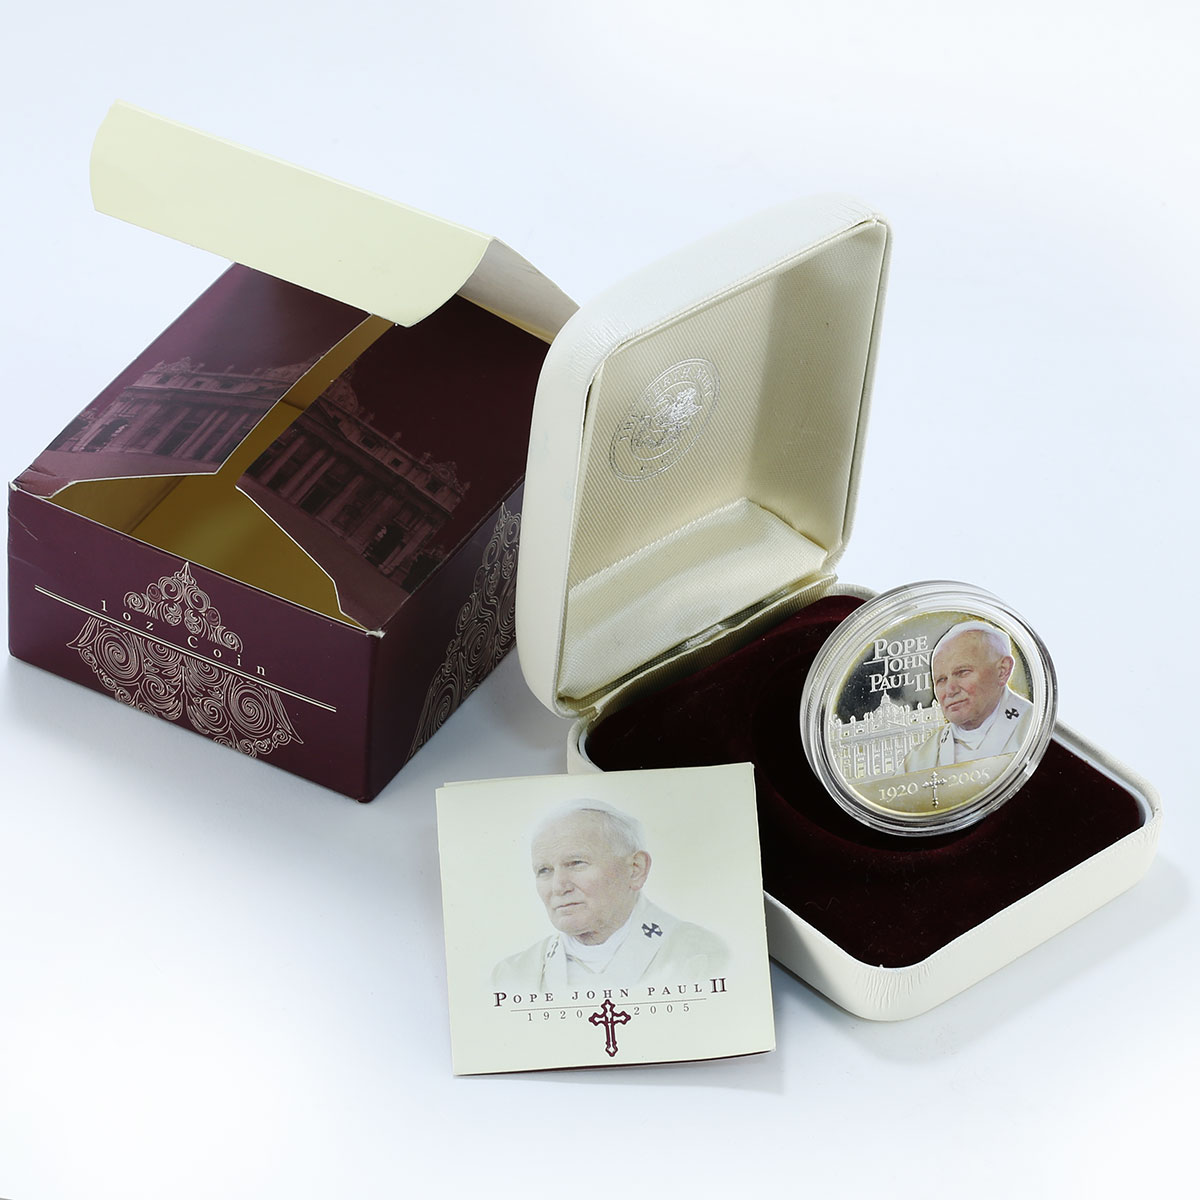 Cook Islands 1 dollar Pope John Paul II 1920-2005 colour proof silver coin 2005